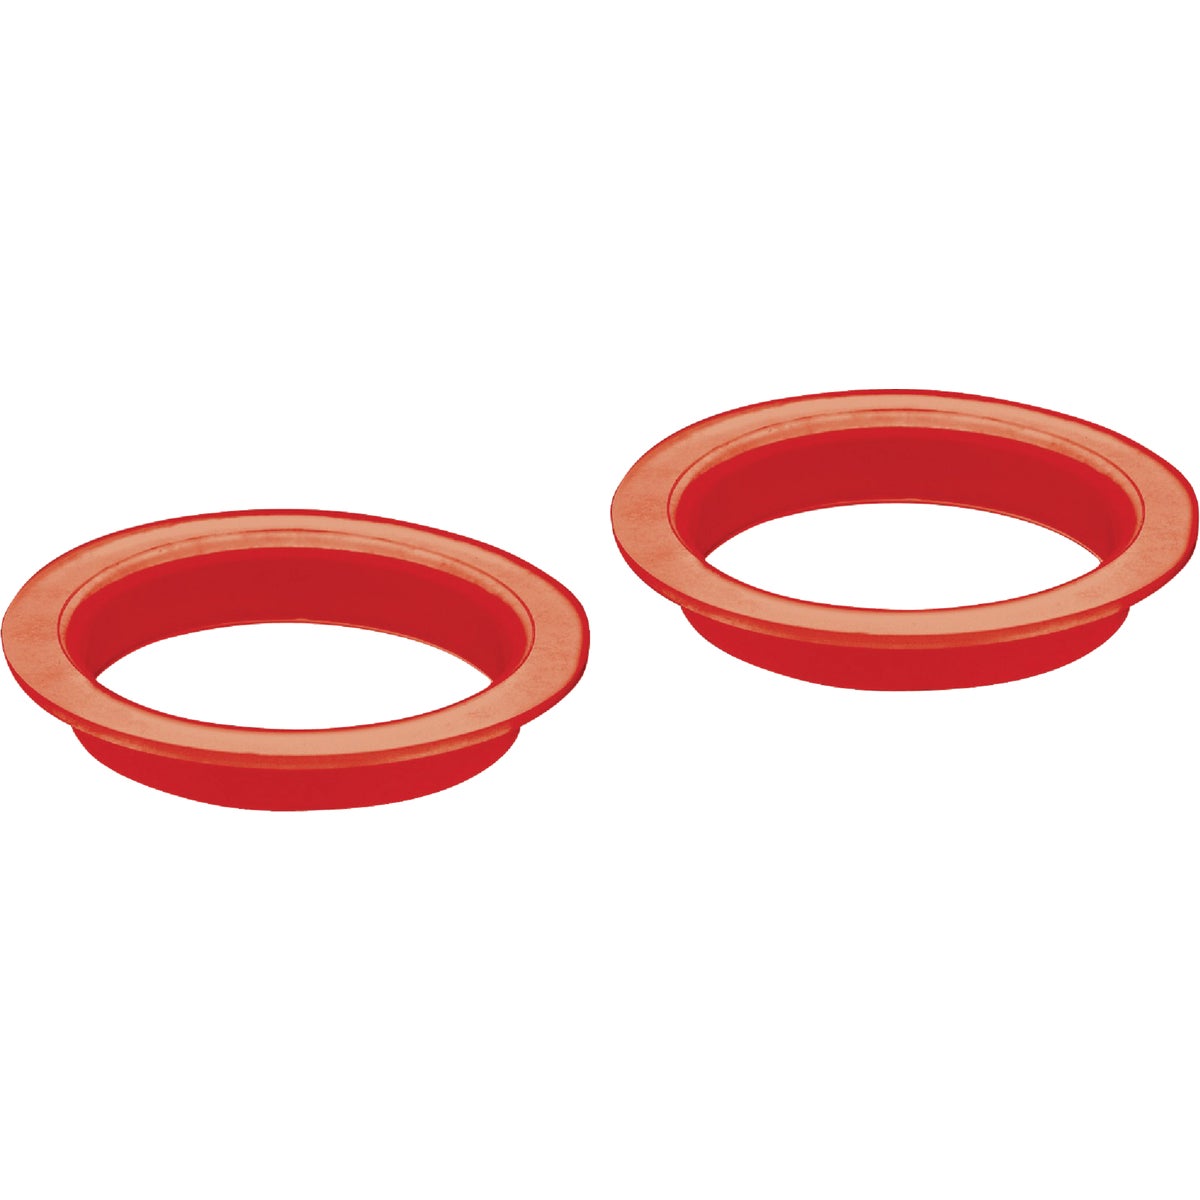 Item 465453, Rubber tailpiece washer, 1-1/2".